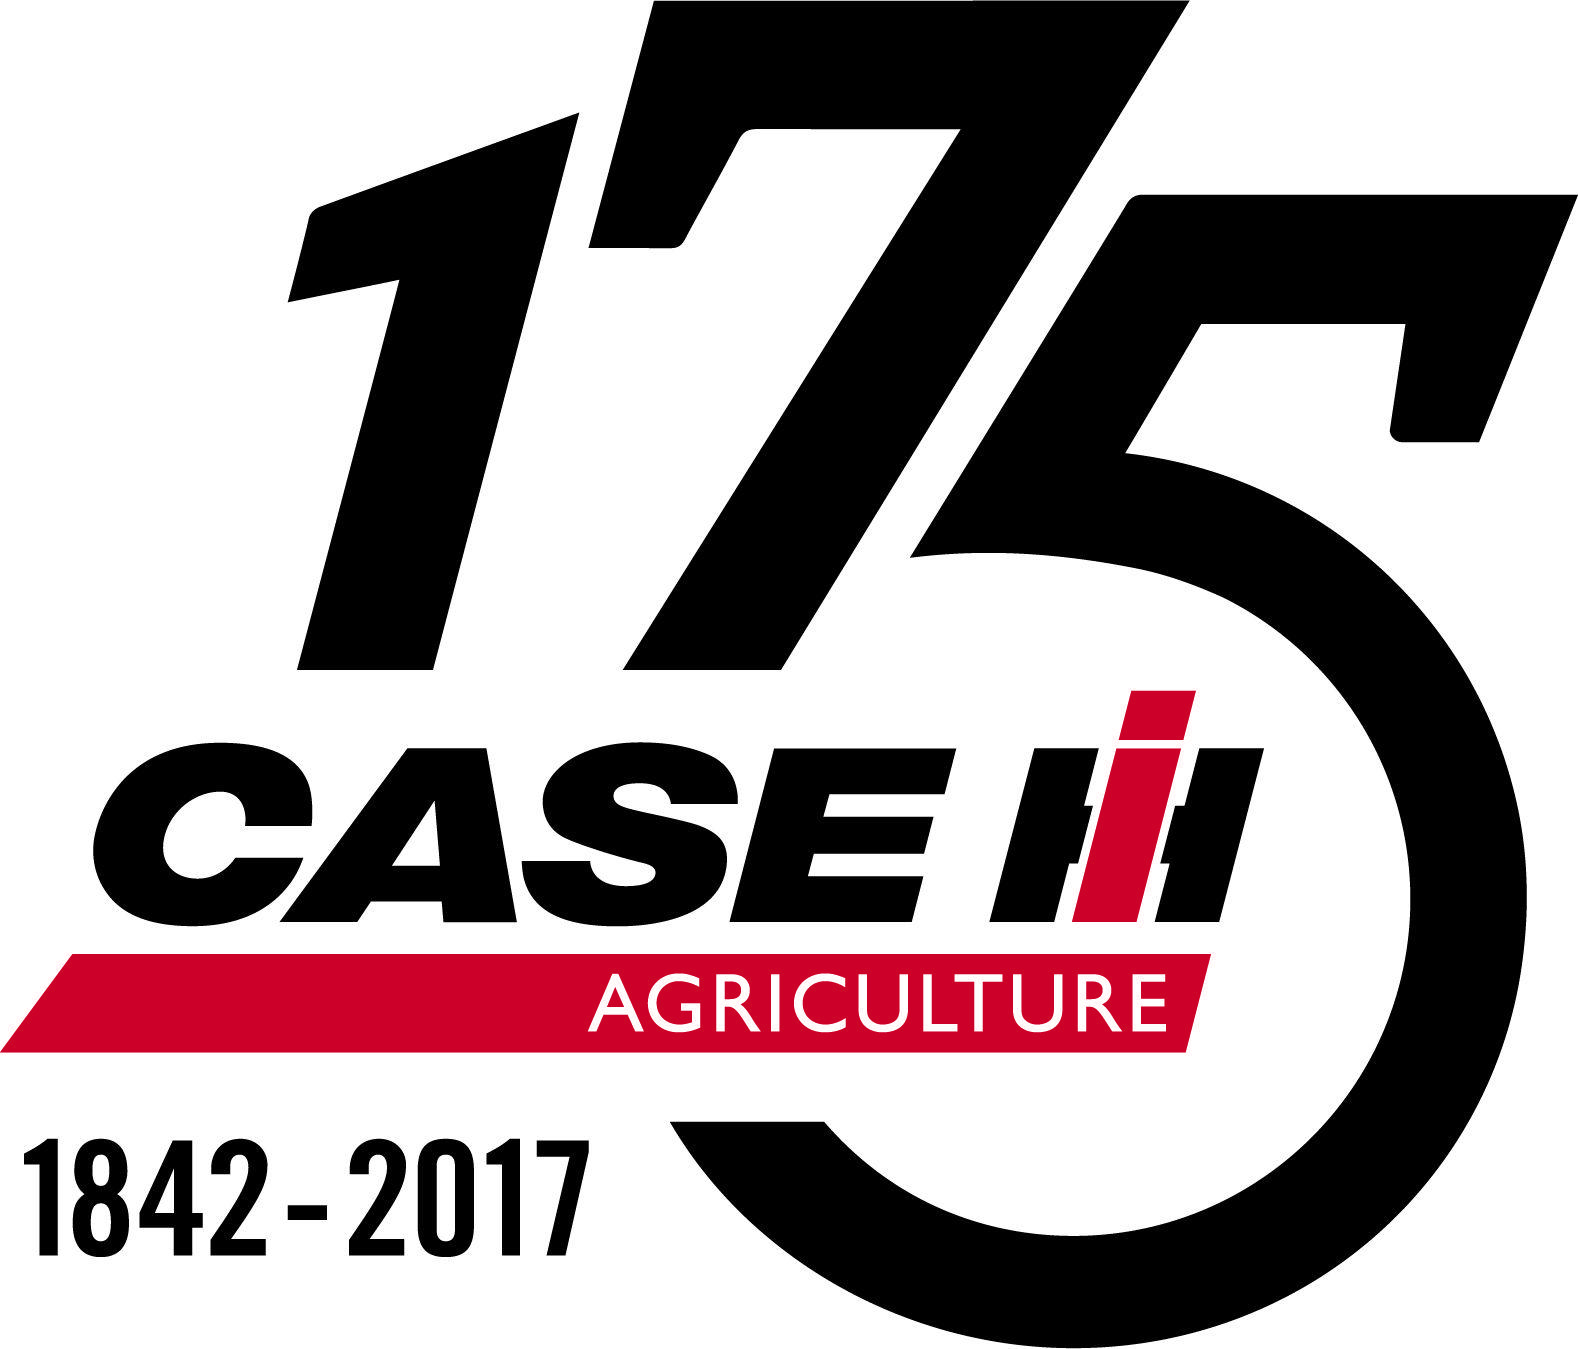 Case Agriculture Logo - Celebrating 175 Years of Cutting Edge Agricultural Equipment